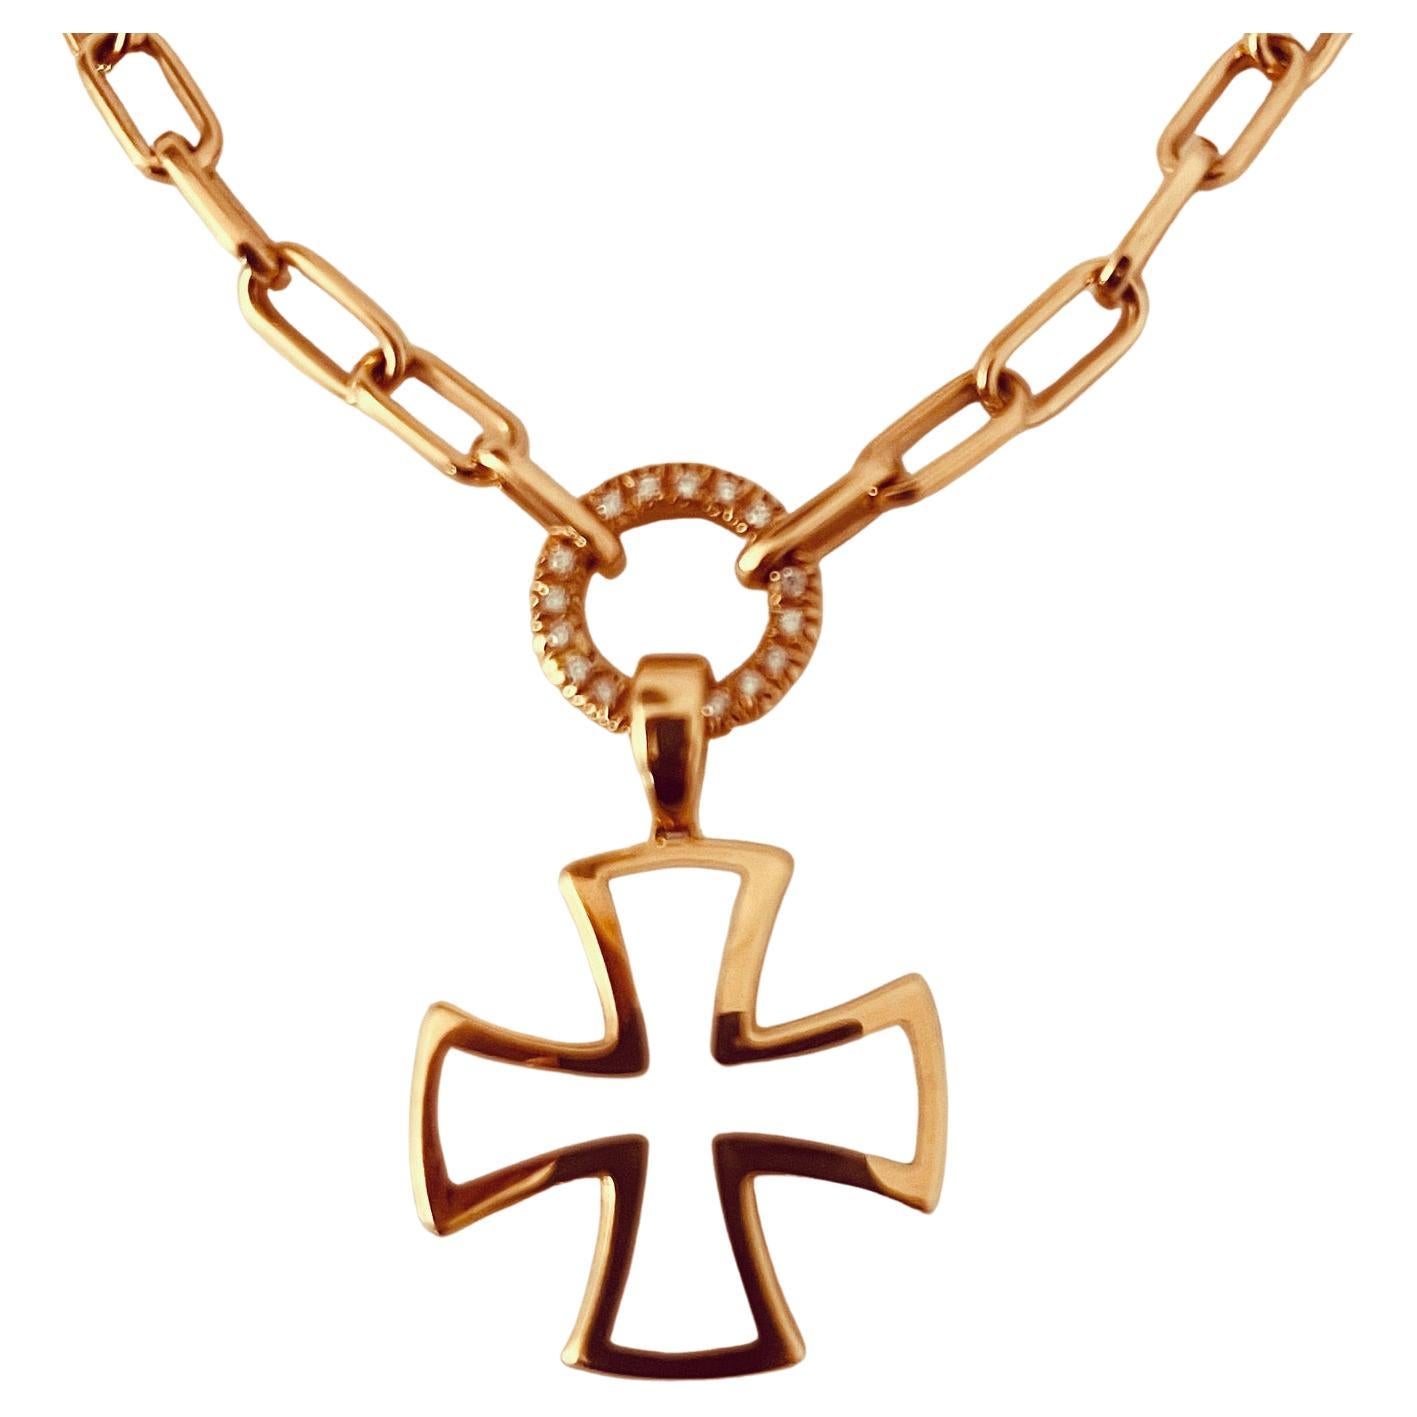 18 carat yellow gold, diamond and enamel cross pendant necklace. The open link chain connected to a diamond suspended ring and white enamel cross. 46cm long. 38 grames weight. Aprox. 0.2 carat diamonds. Price: 5,230£. Hallmarks: signed Gavello 750